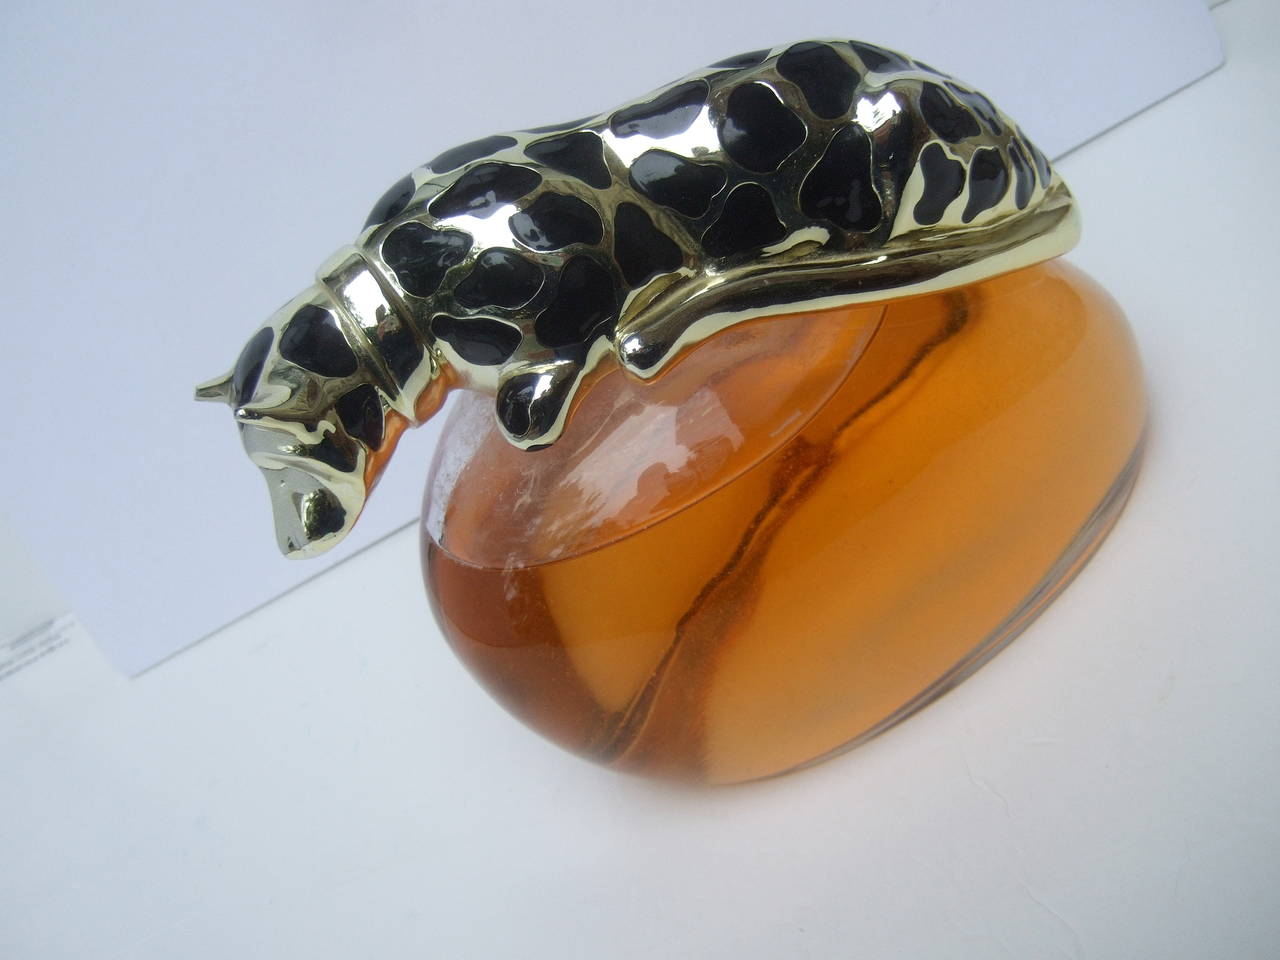 Opulent Large Factice Perfume Display Bottle with Panther Stopper 1